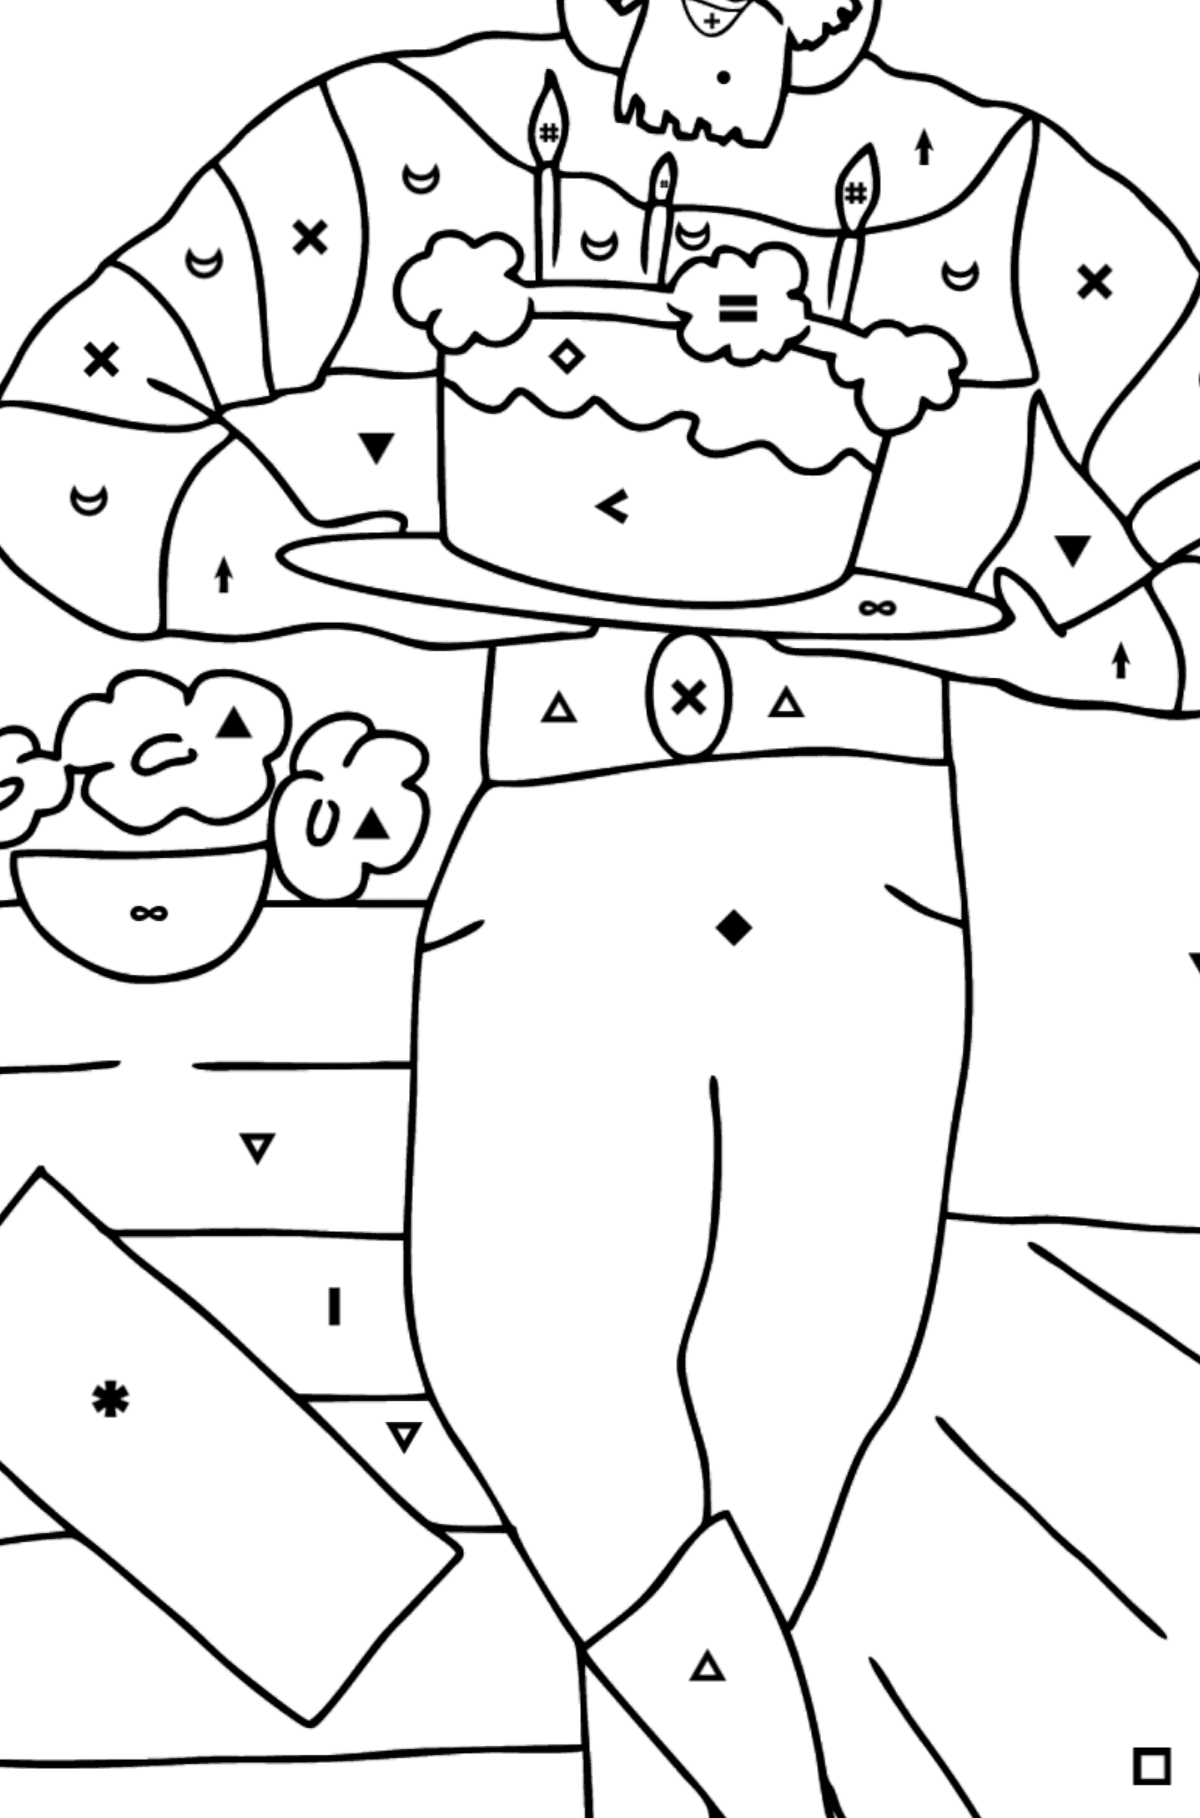 Coloring Page - A Pirate with Cake - Coloring by Symbols for Kids